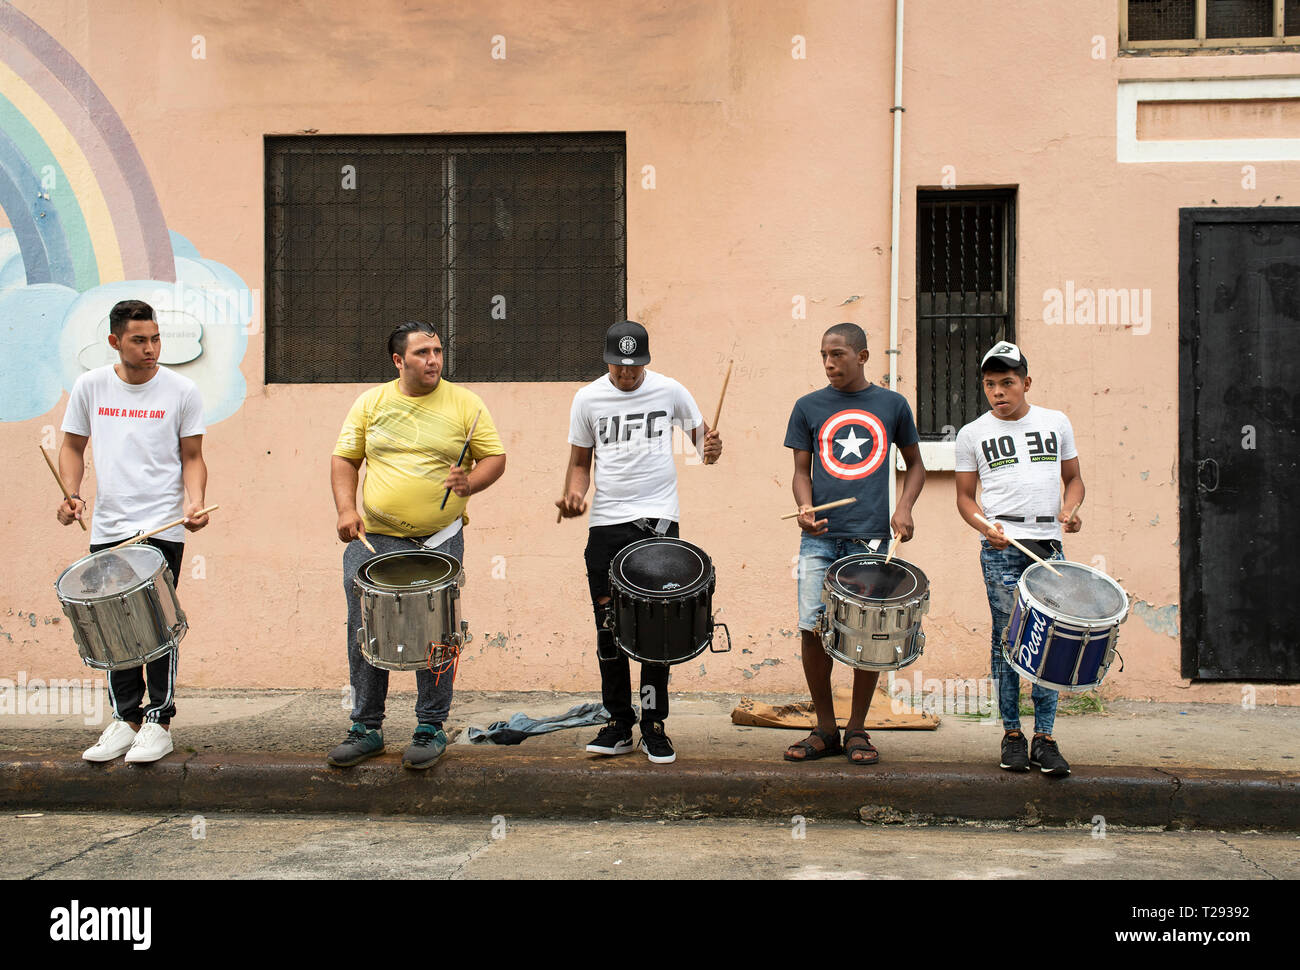 Young musicians rehearsing percussion with surdos (marching snare drum) on Sunday afternoon in downtown Panama City. Panama, Central America. Oct 2018 Stock Photo